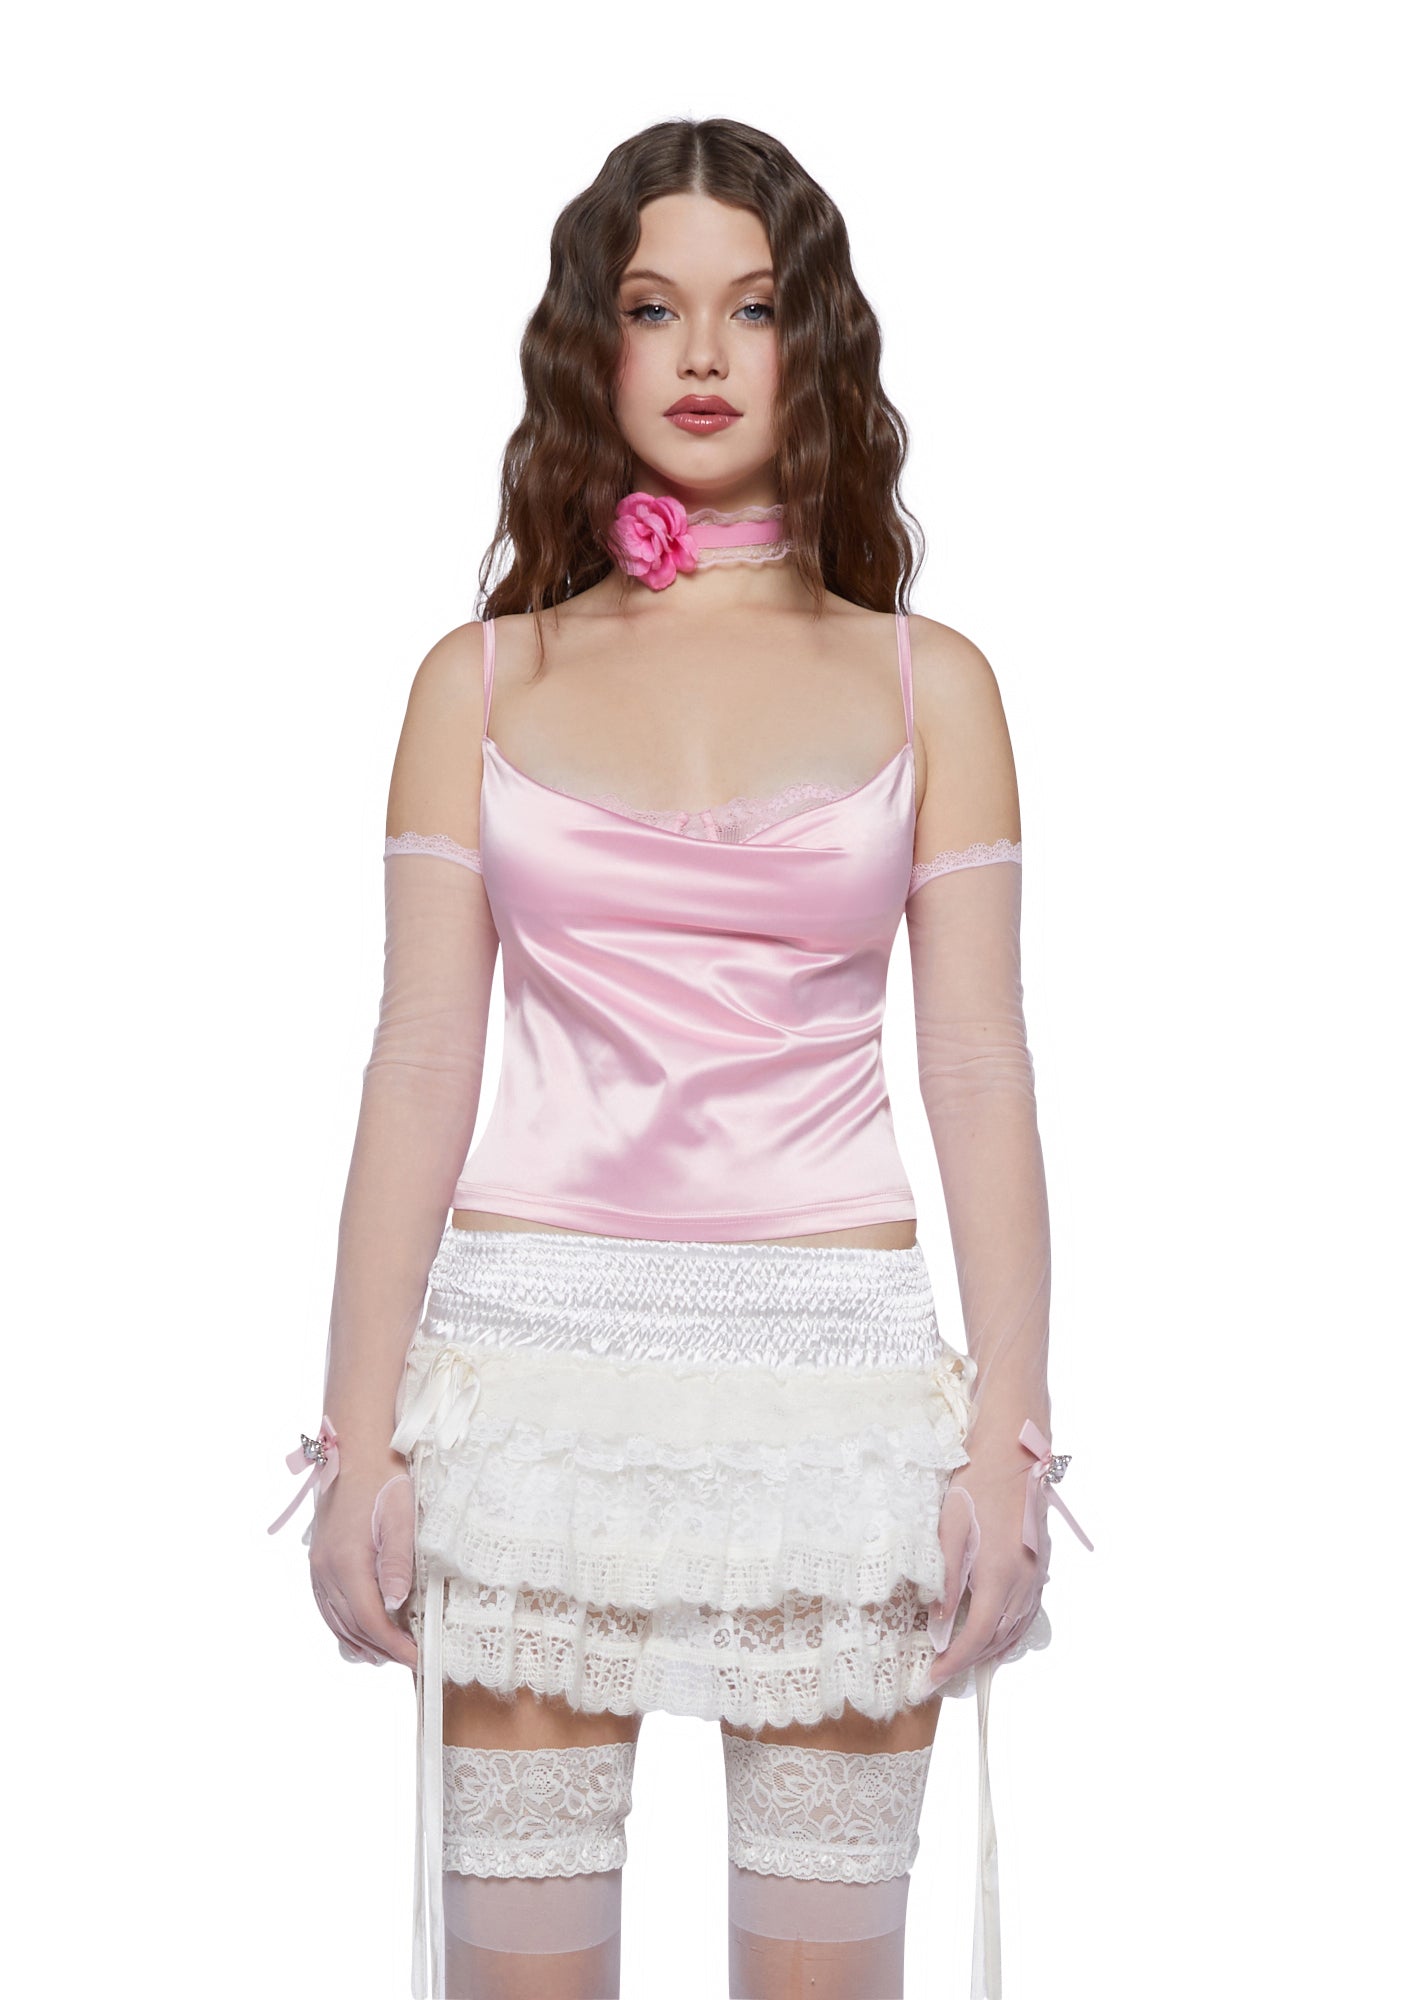 Sugar Thrillz Satin Top With Cowl Neckline And Lace Bra - Pink